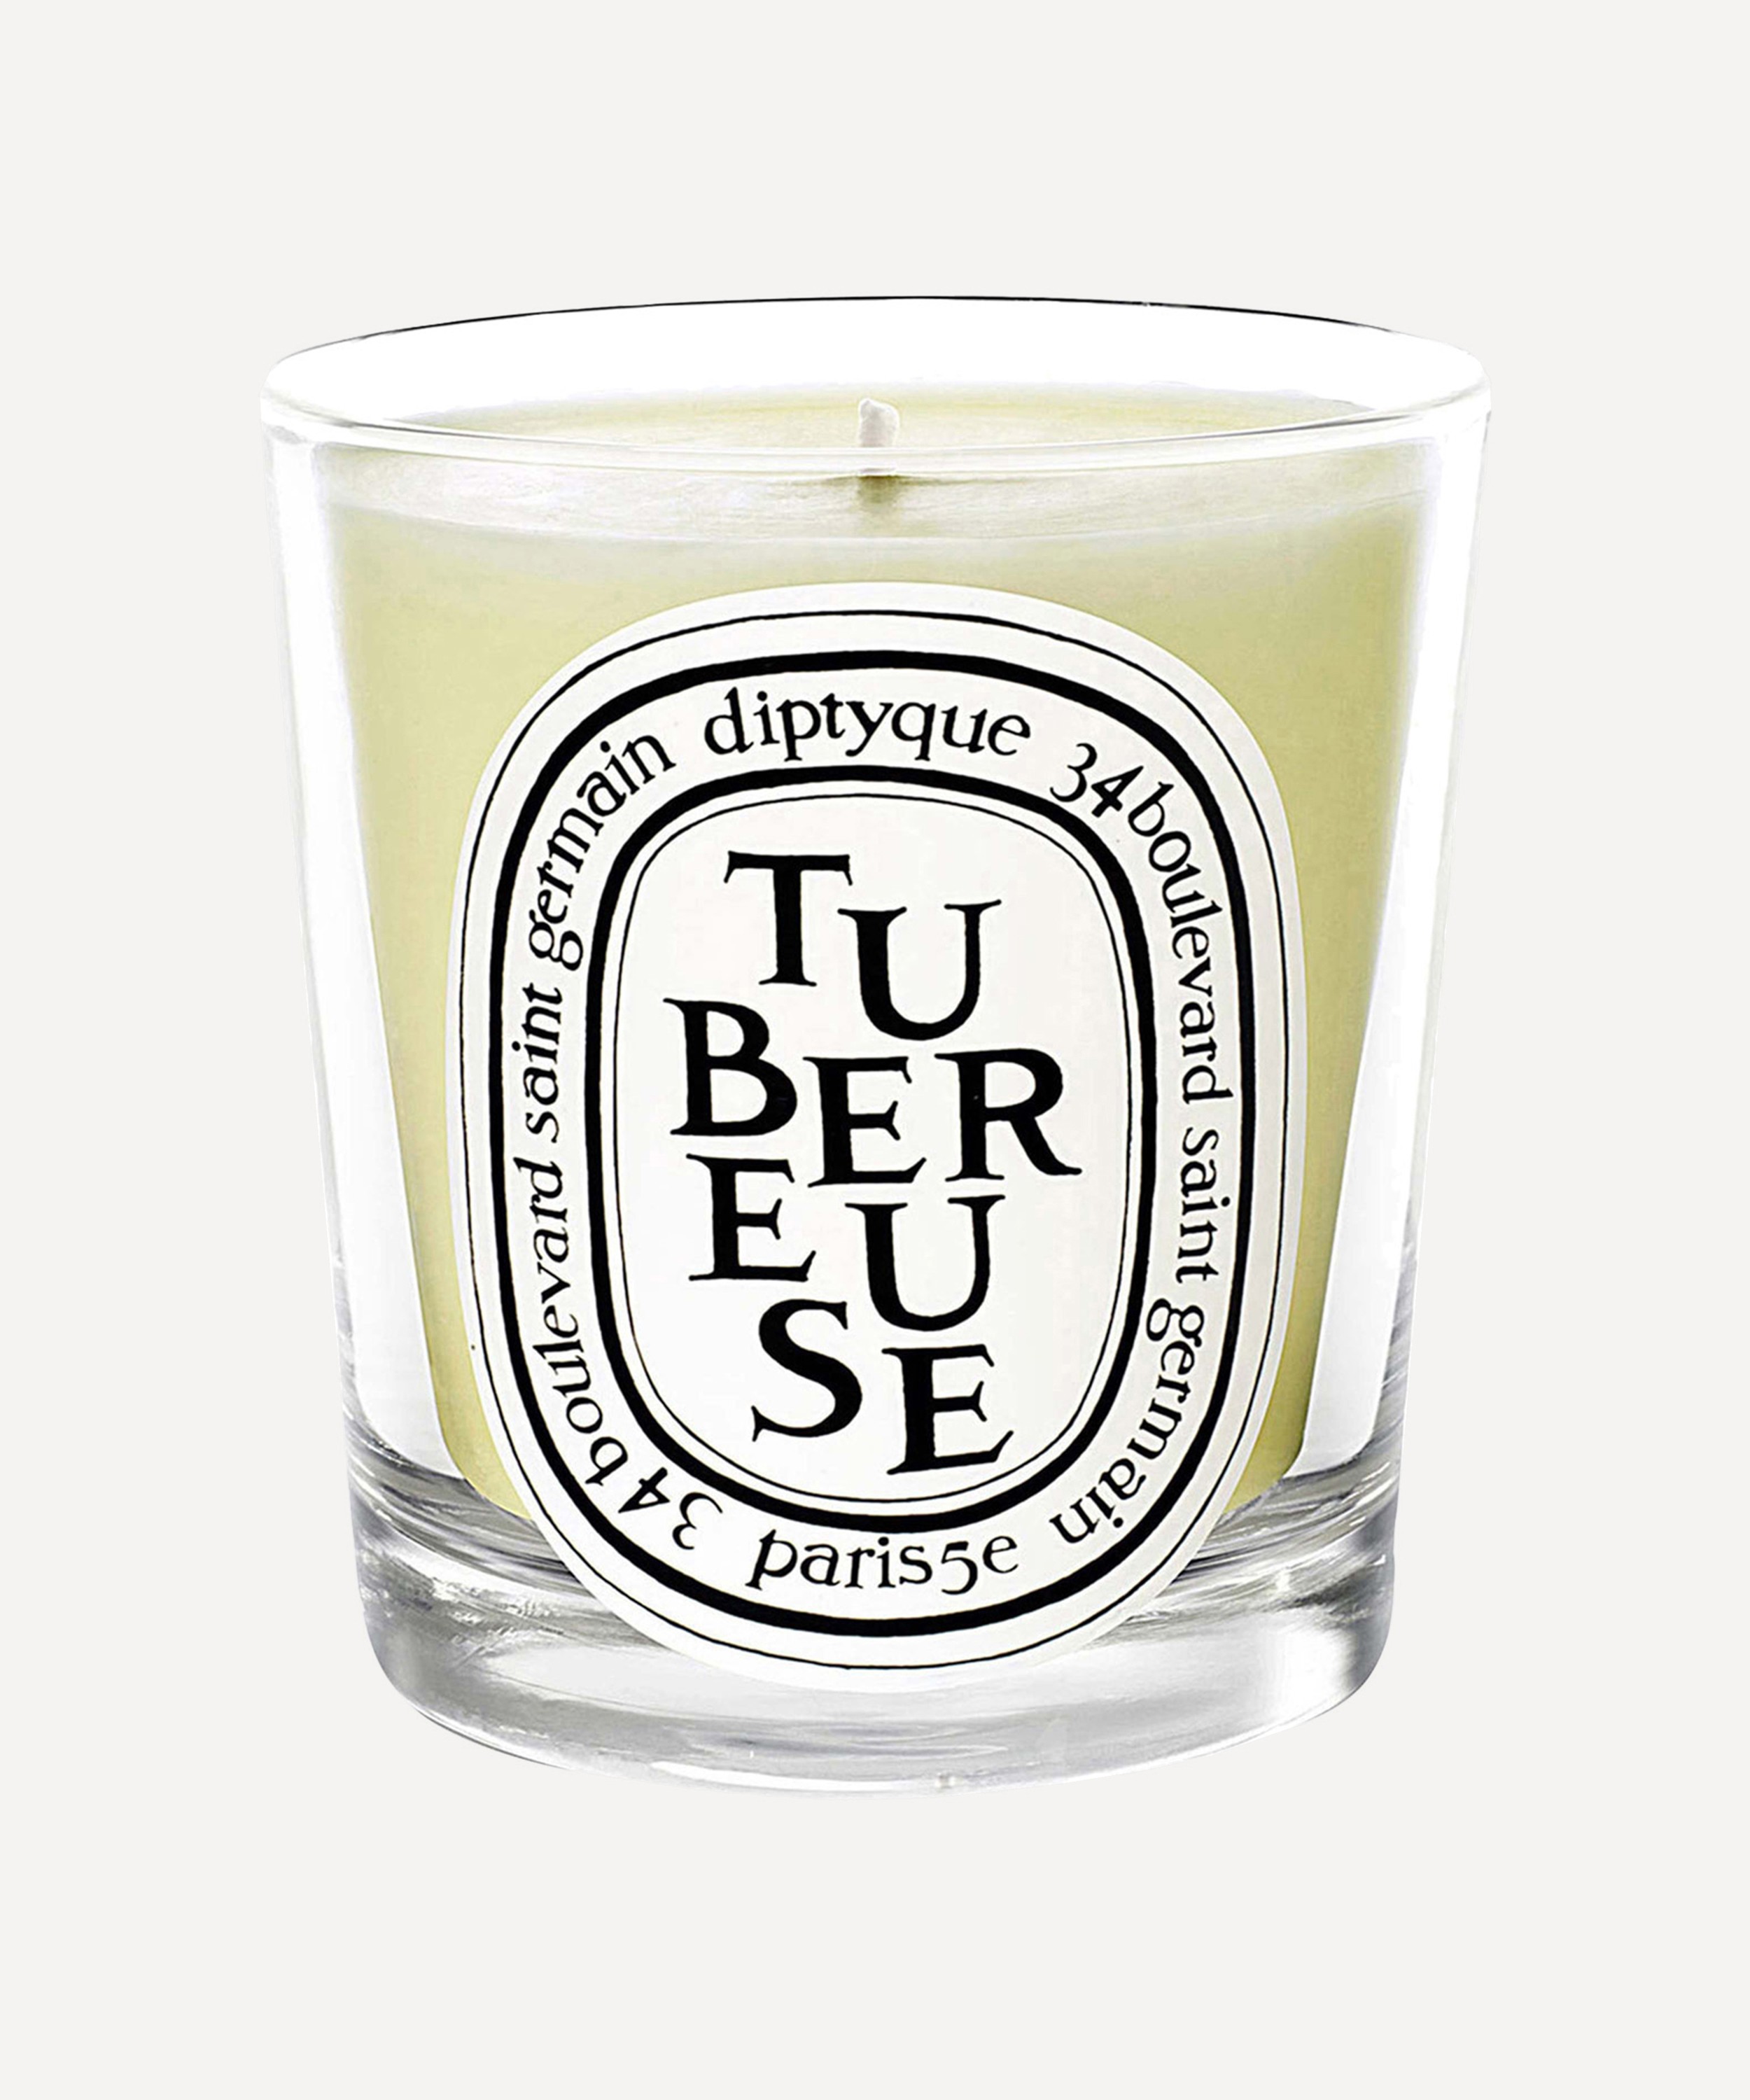 Diptyque - Tubéreuse Scented Candle 190g image number 0